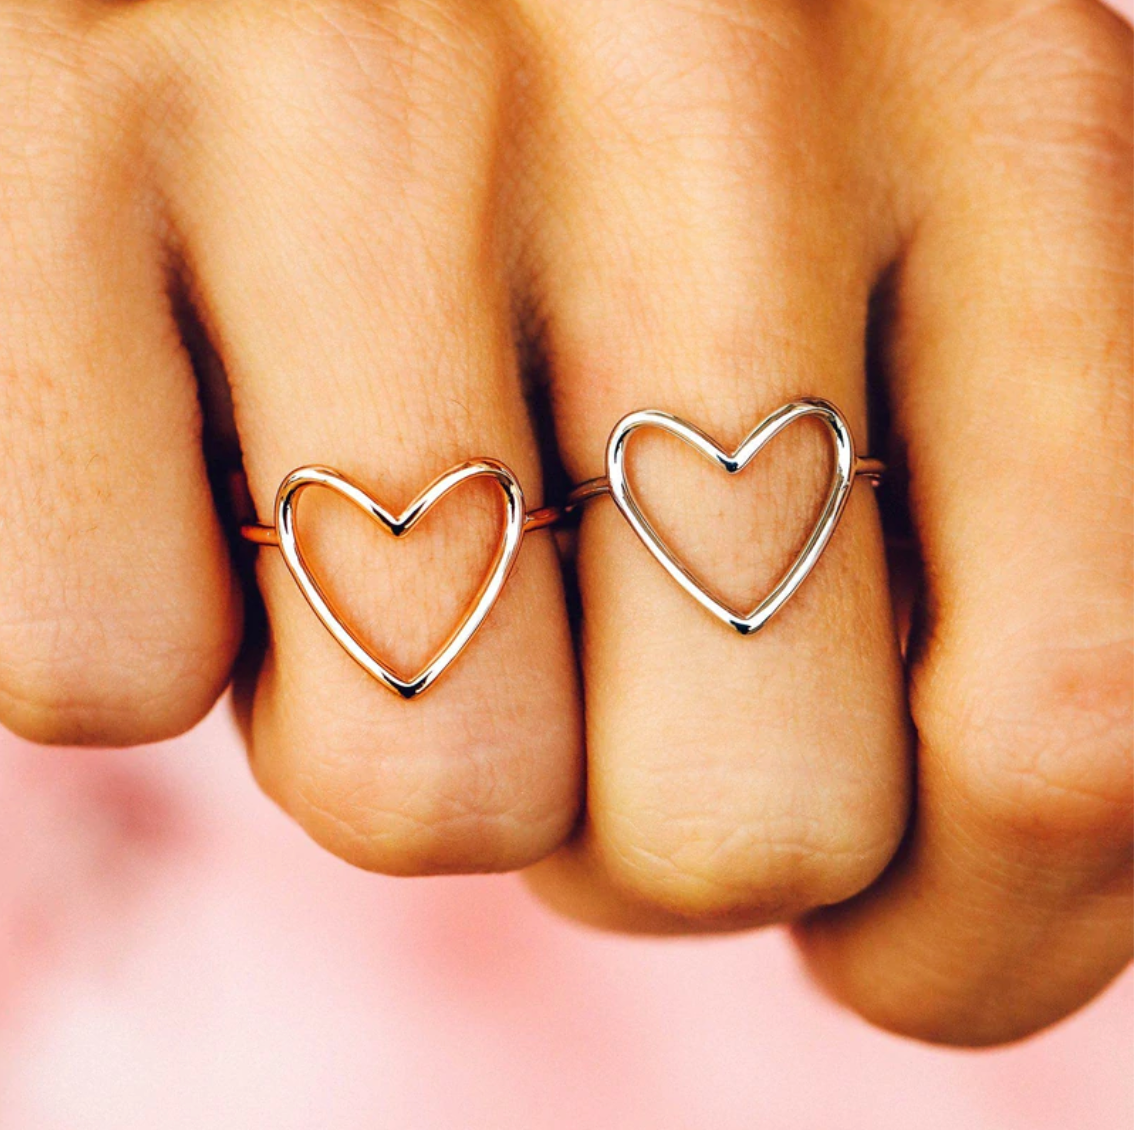 Silver Big Heart Ring - JustBelieve.Boutique